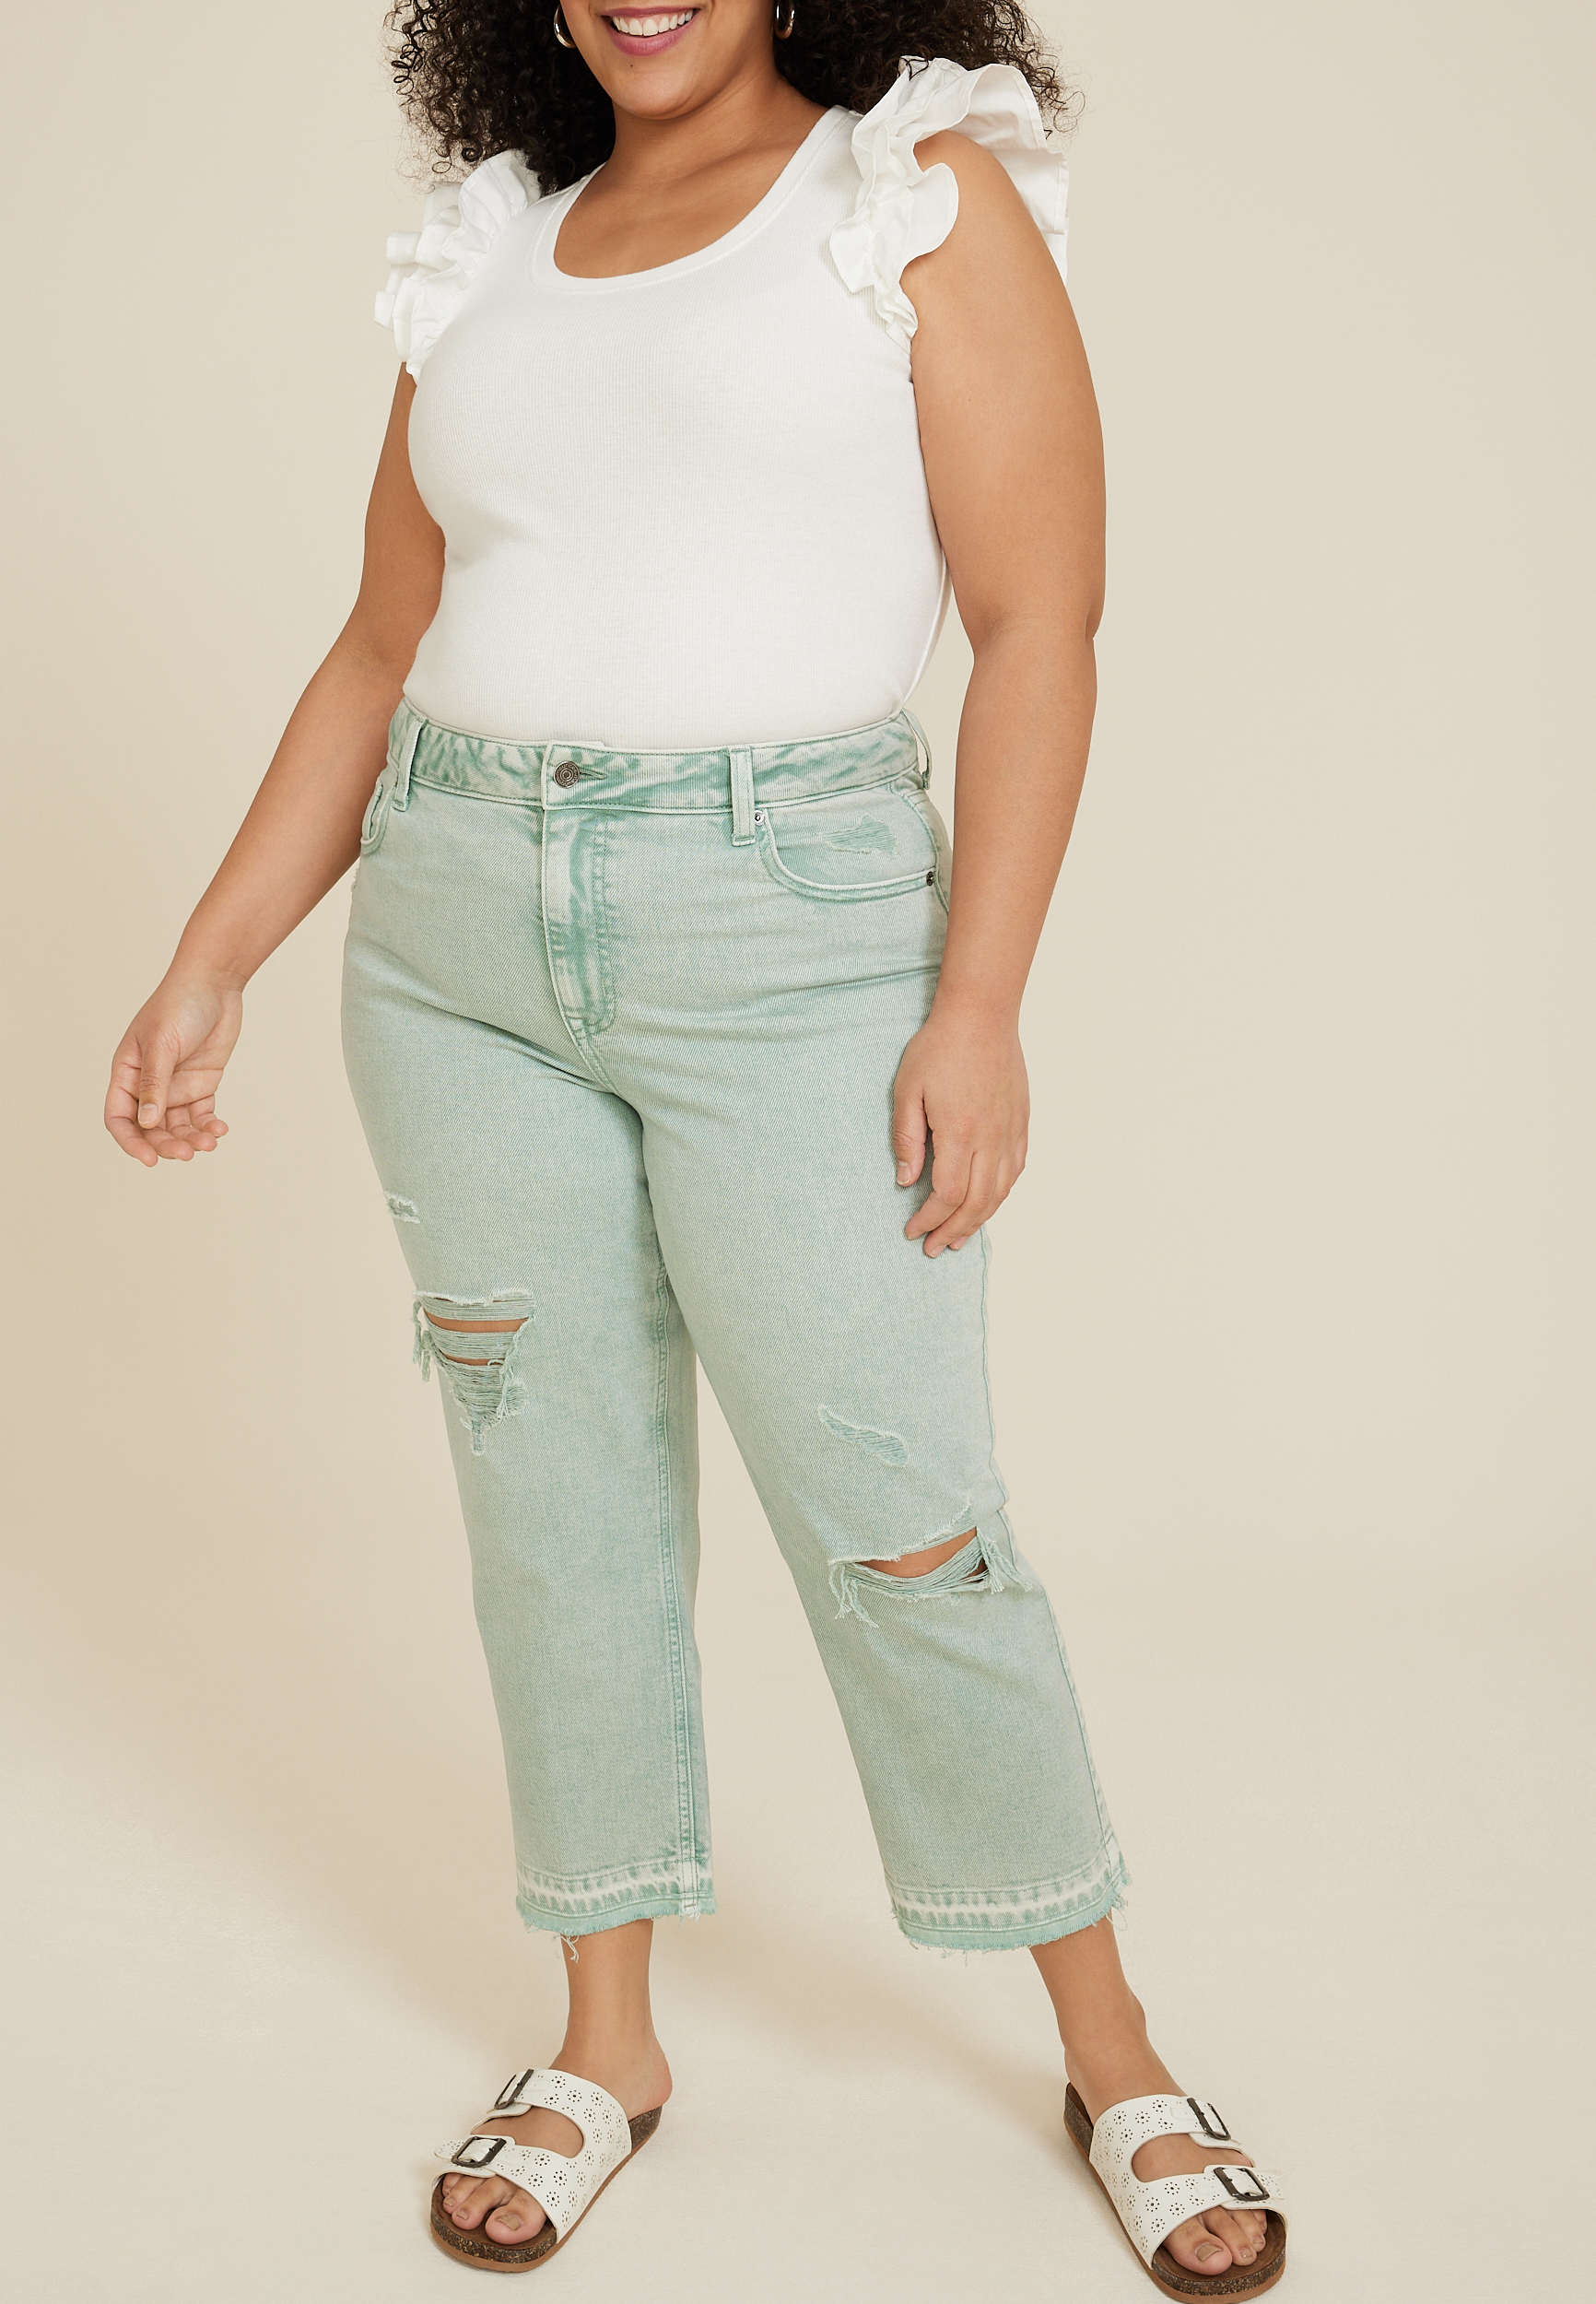 Women's Classic Plus Size Capri Jeggings. • Capri jeggings featuring a  light sheen and jean-style • Lightweight, breathable cotton-blend material  • Belt loops with 5 functional pockets • Super Stretchy • Pull